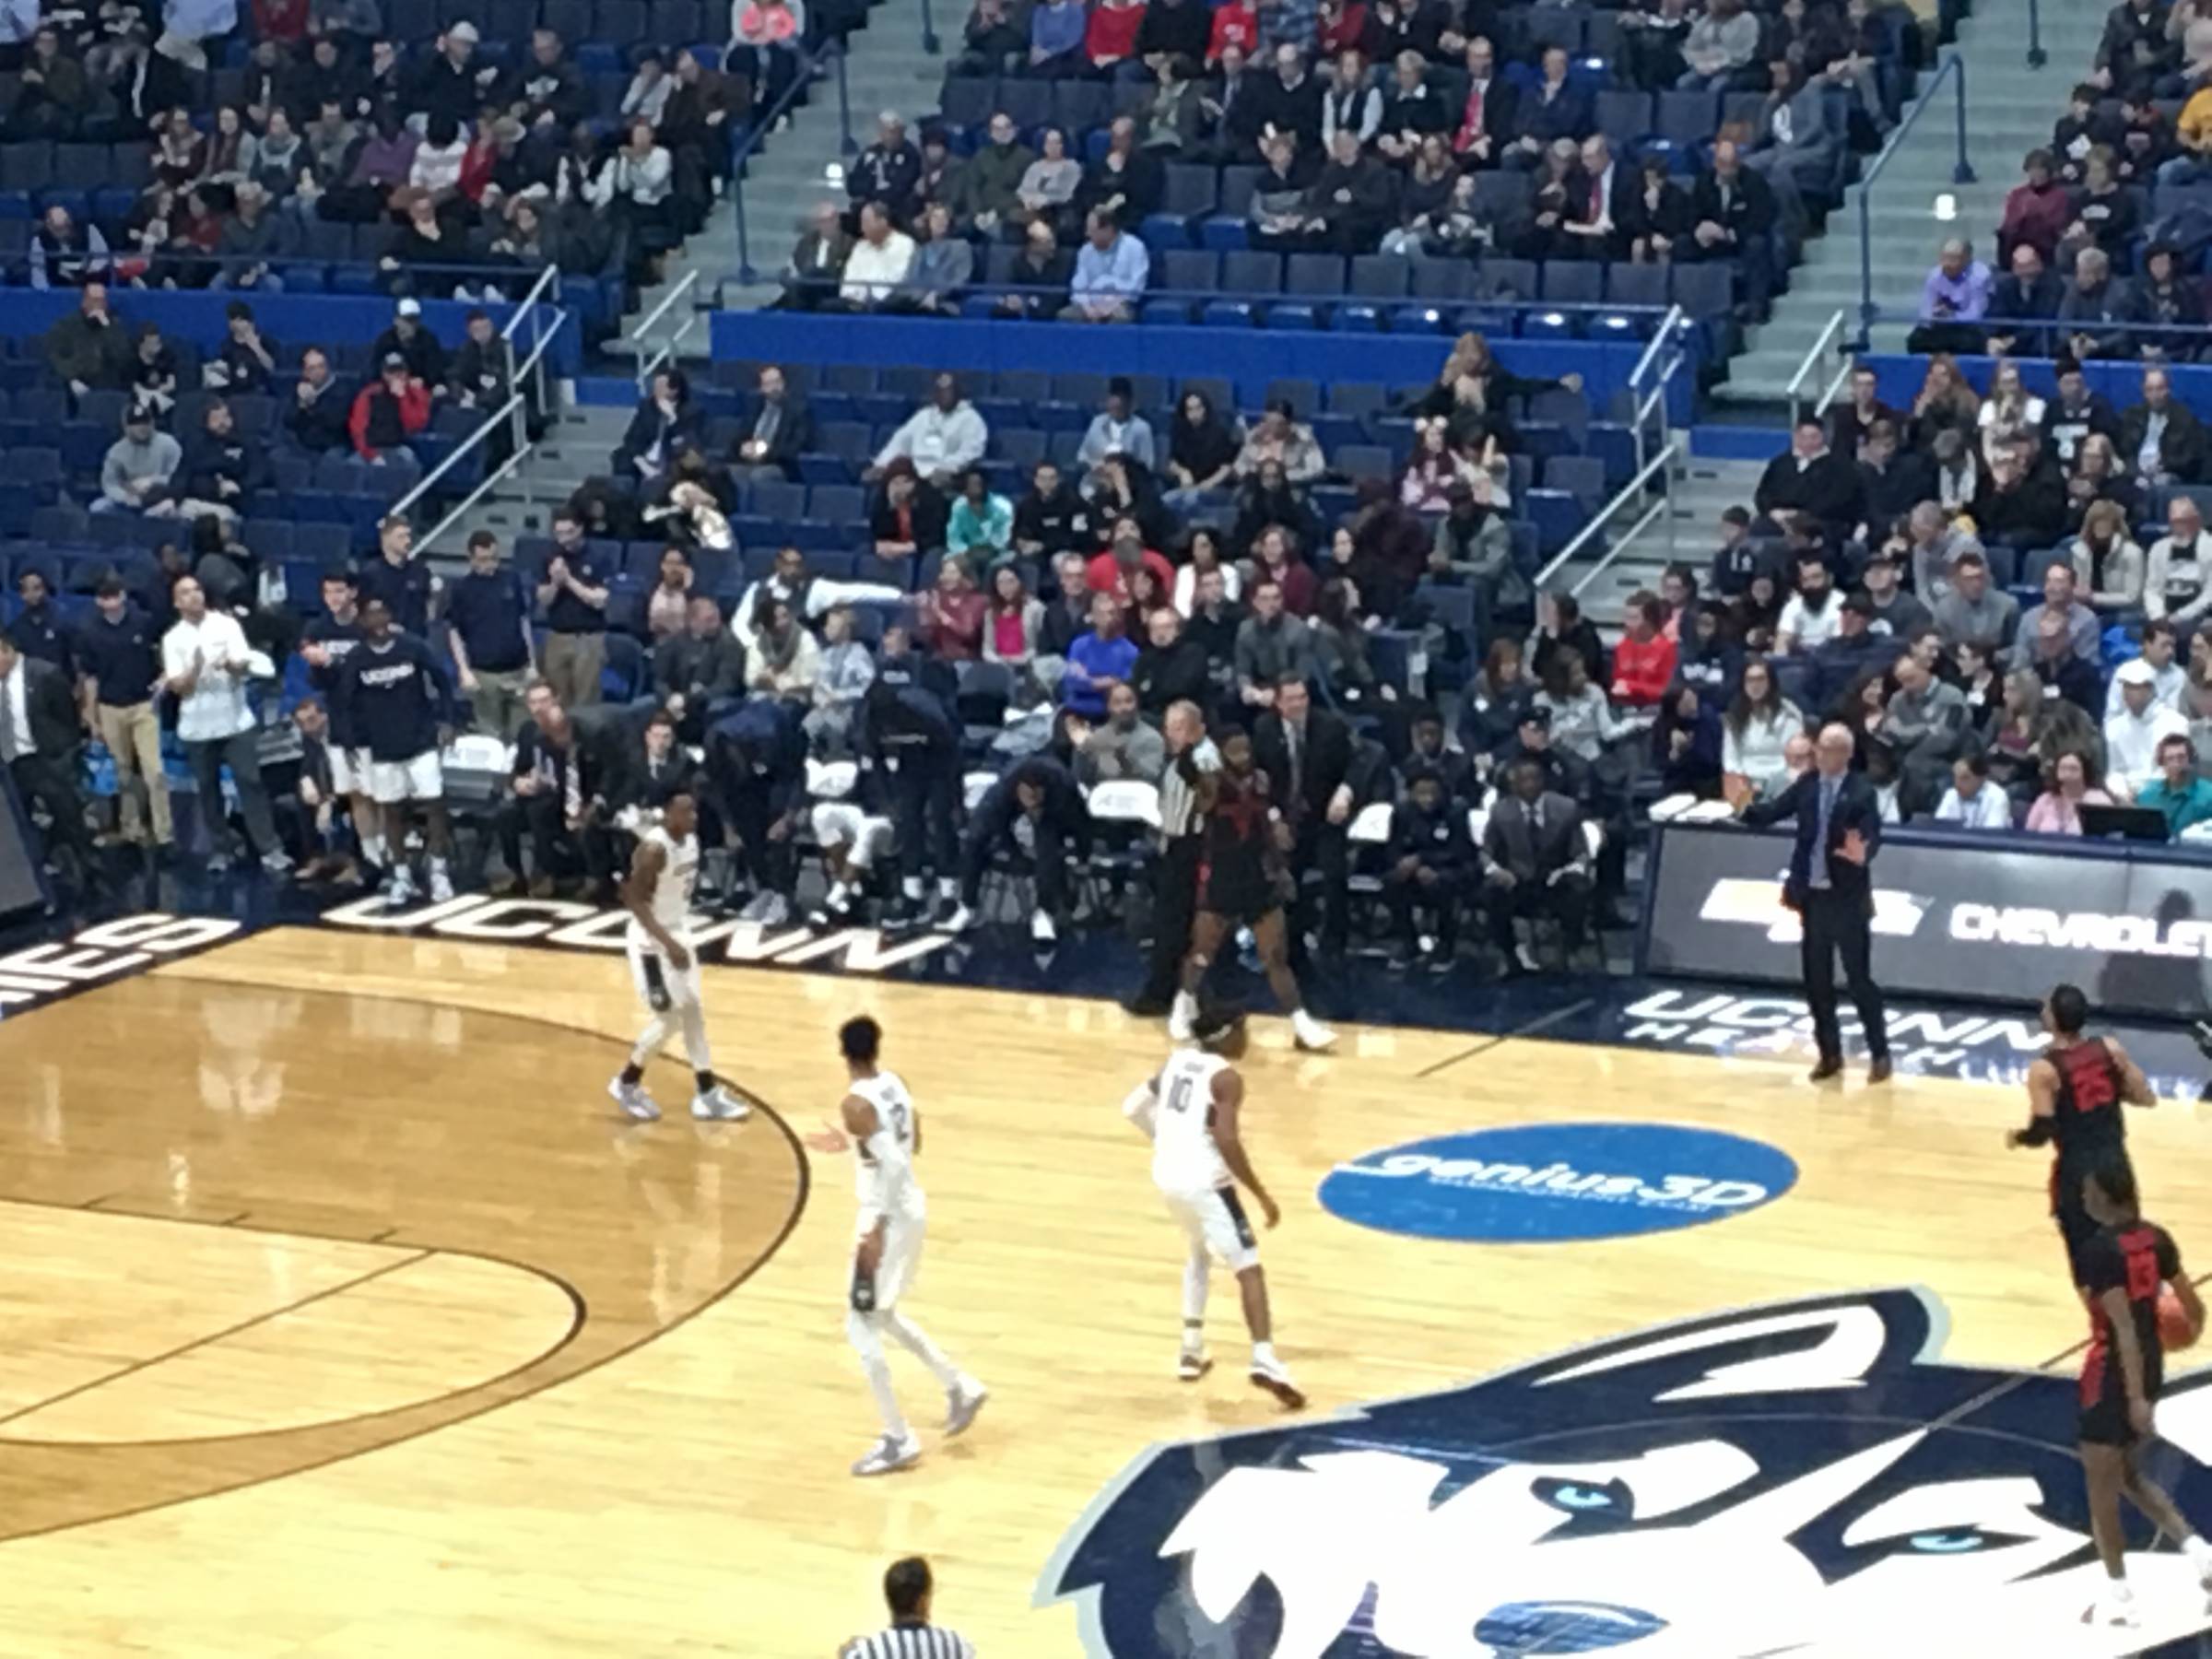 XL Center Seating Guide - RateYourSeats.com